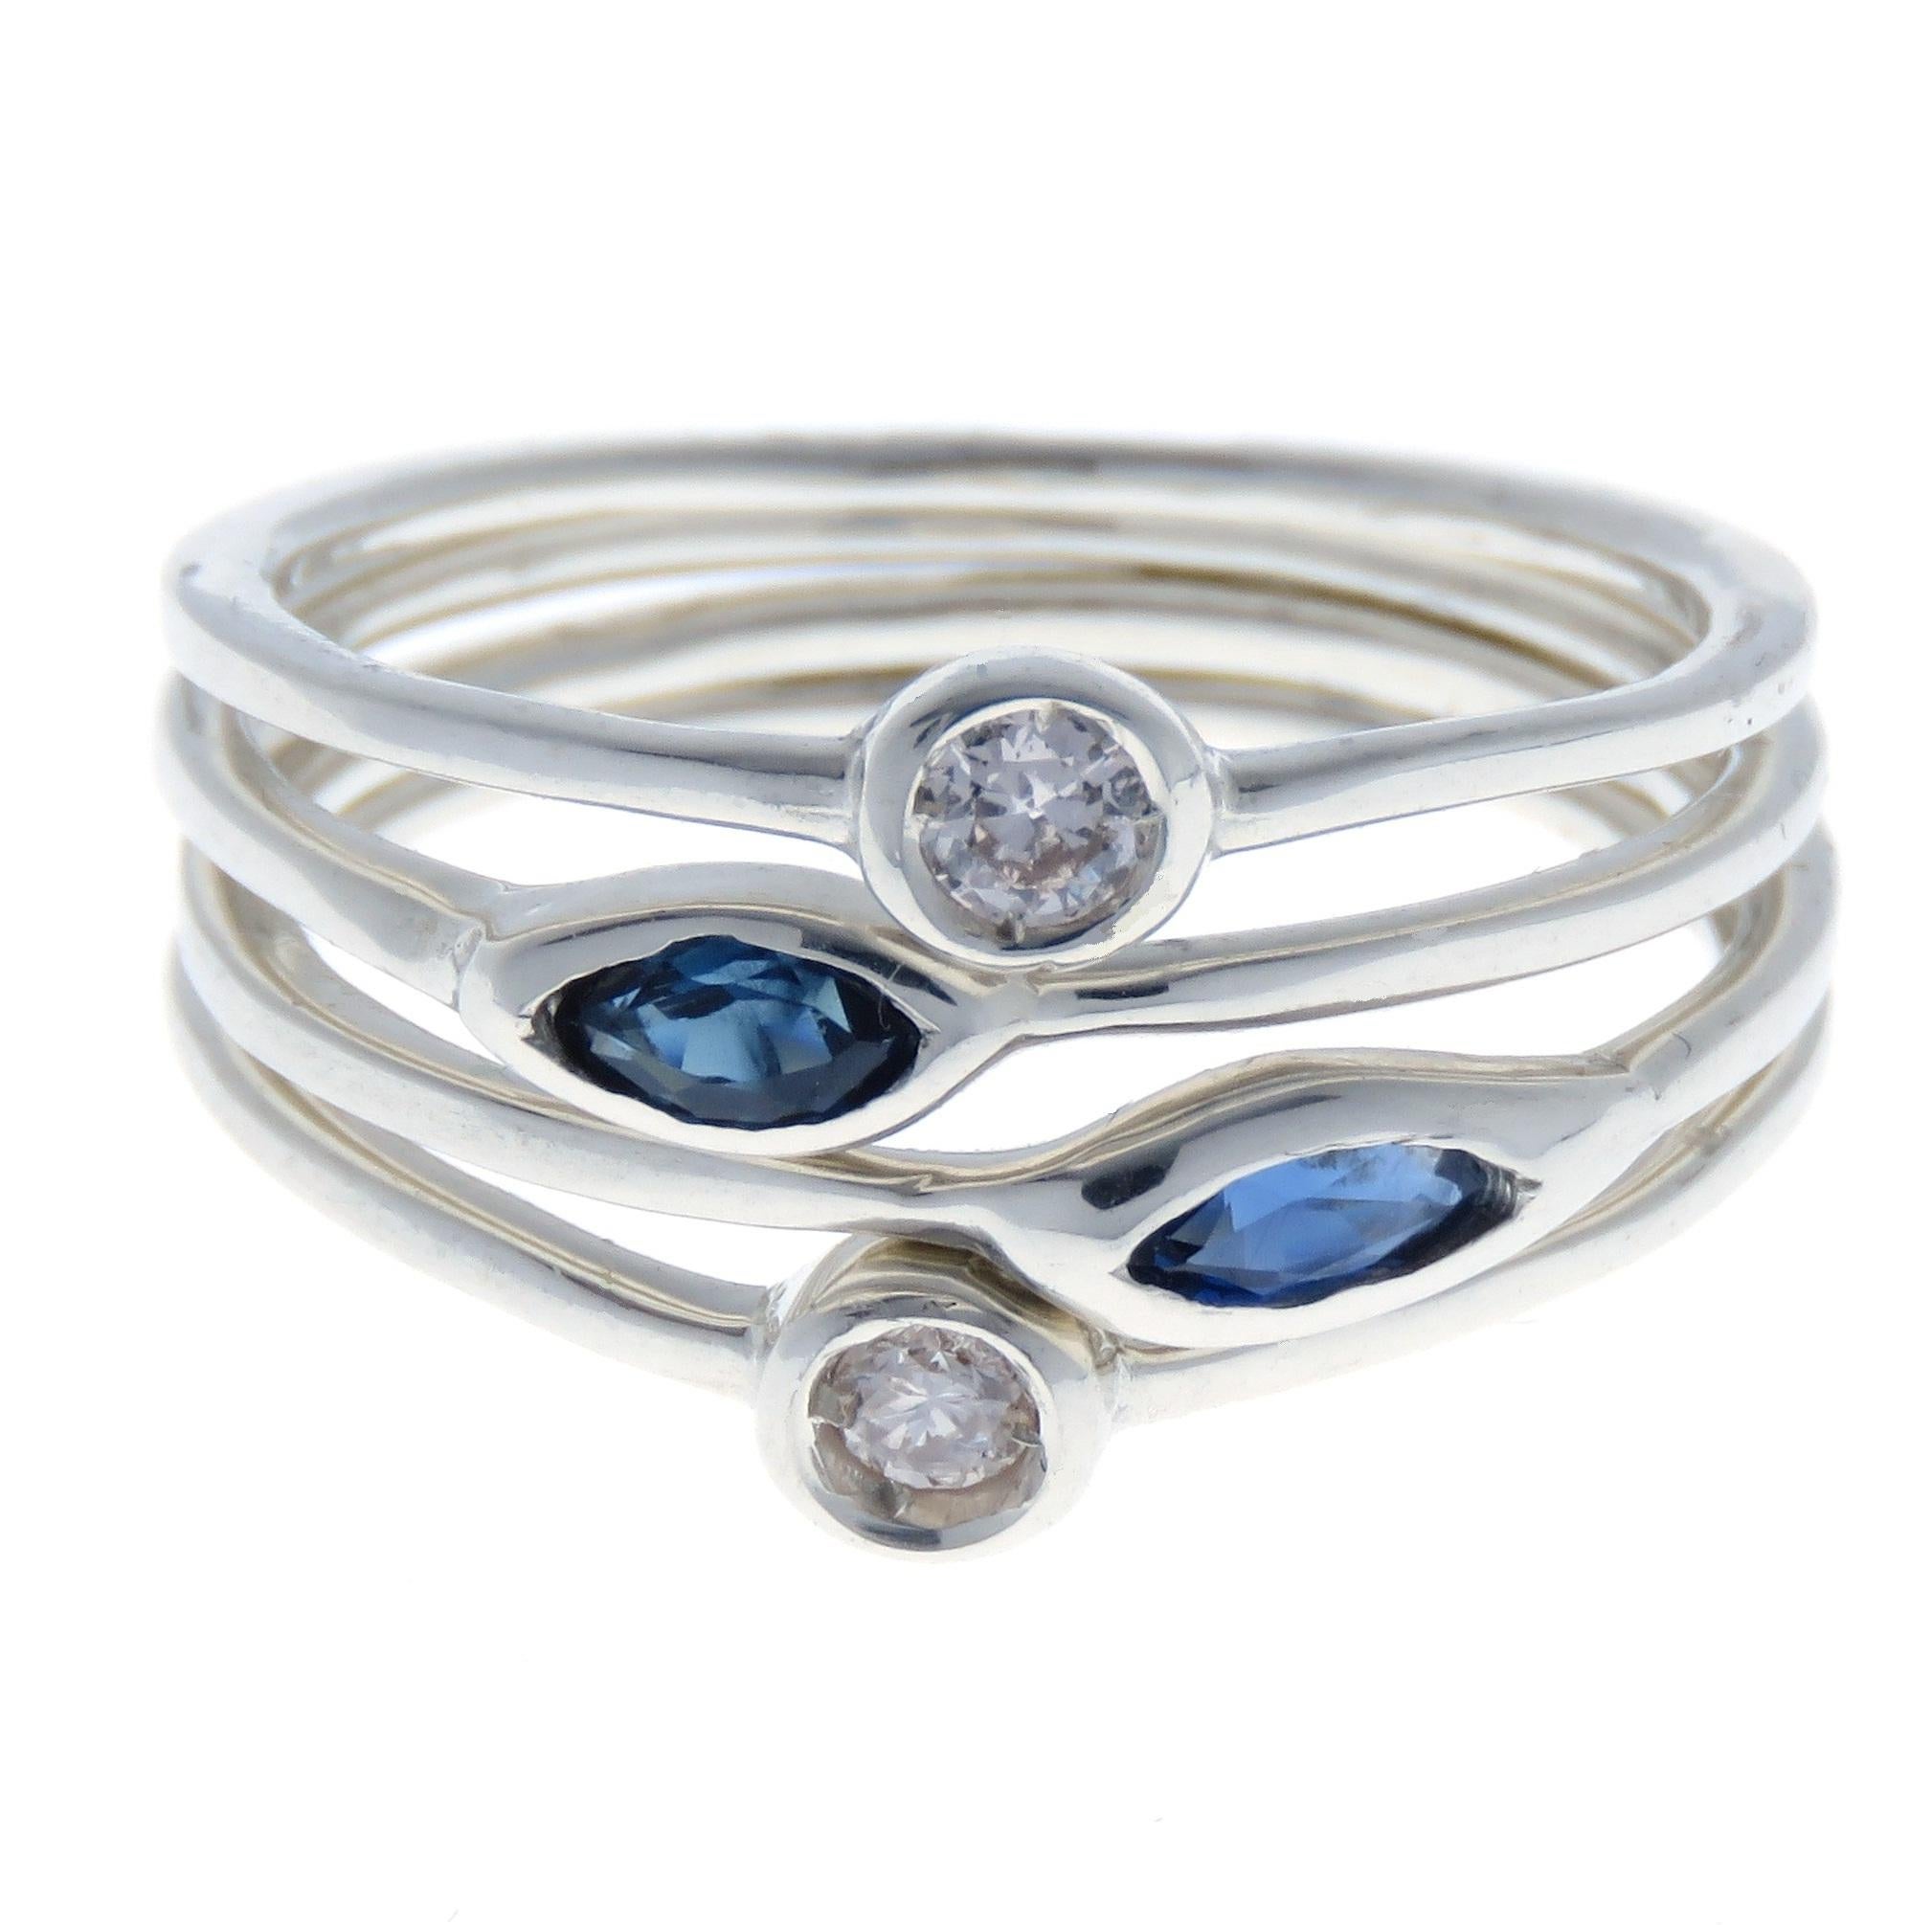 Contemporary Sapphires Diamonds White Gold Ring Handcrafted in Italy by Botta Gioielli For Sale